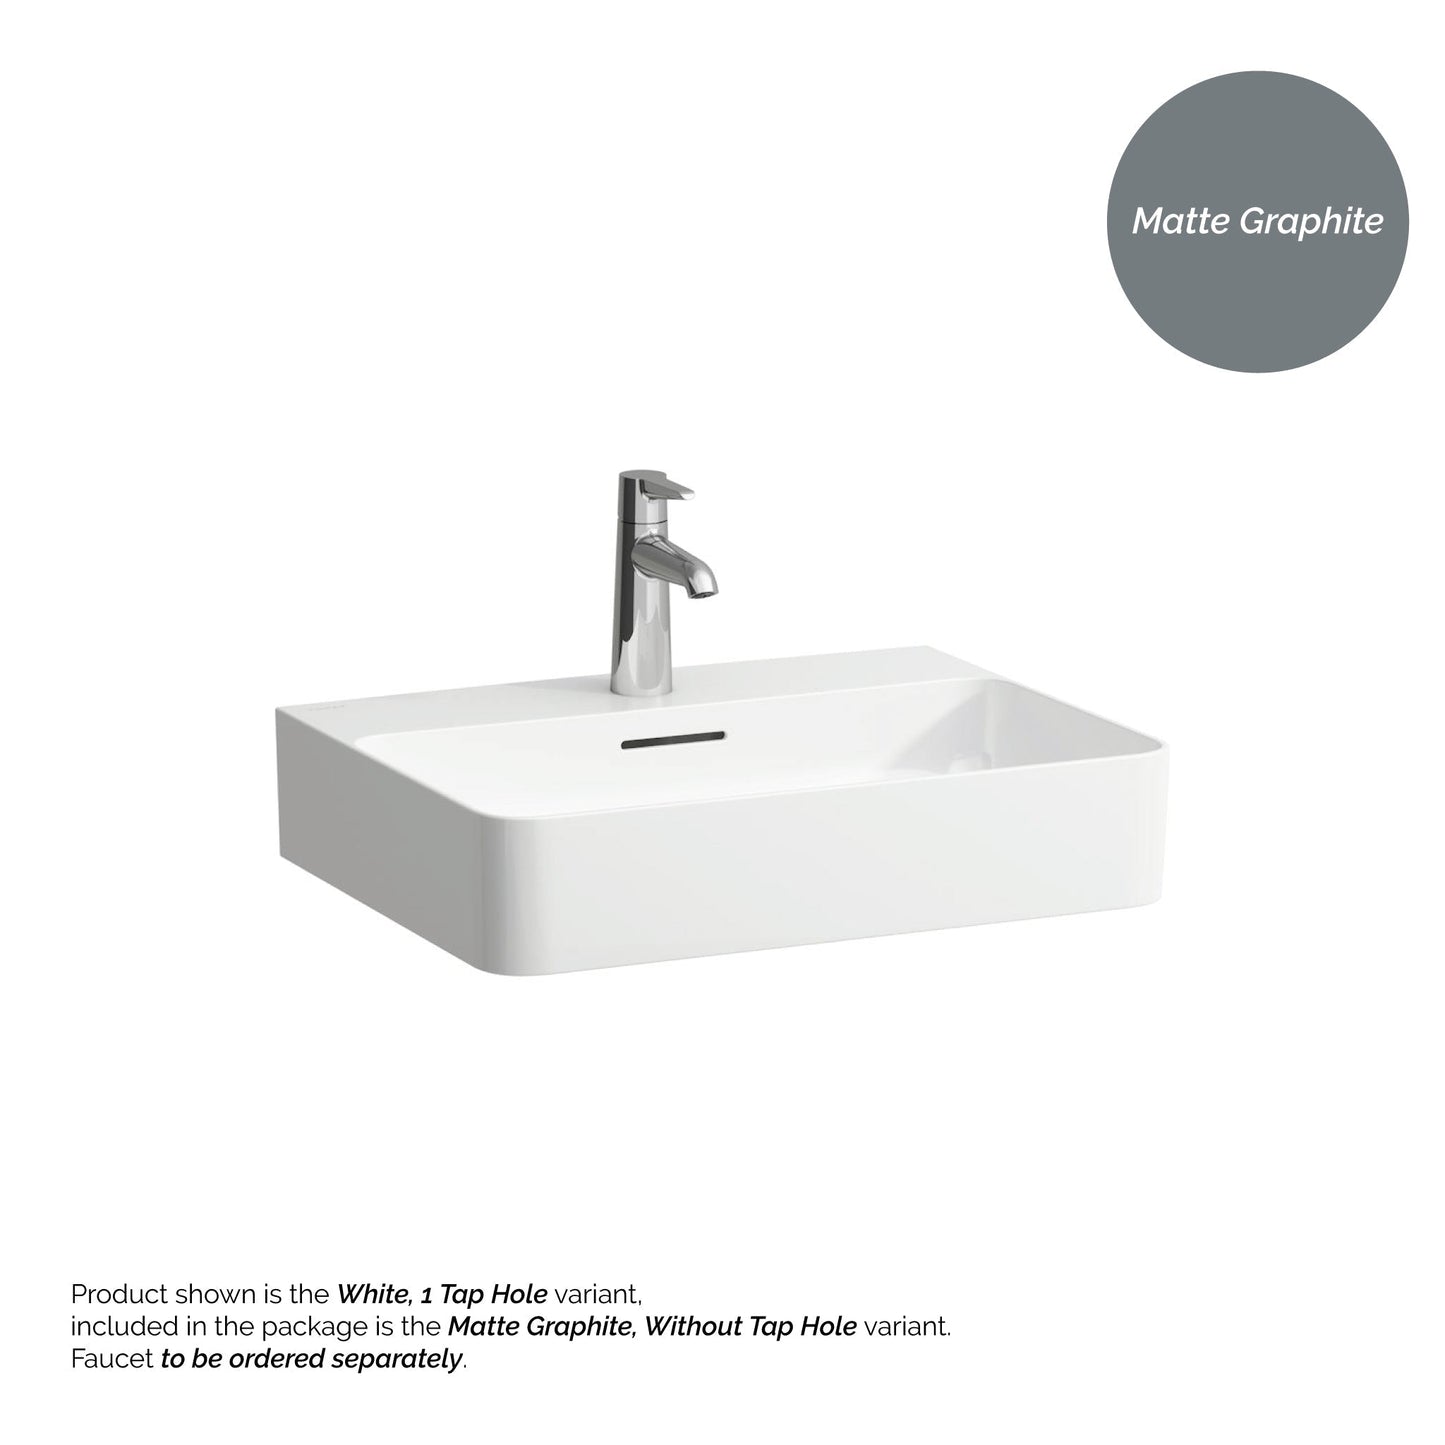 Laufen Val 22" x 17" Matte Graphite Ceramic Wall-Mounted Bathroom Sink Without Faucet Hole